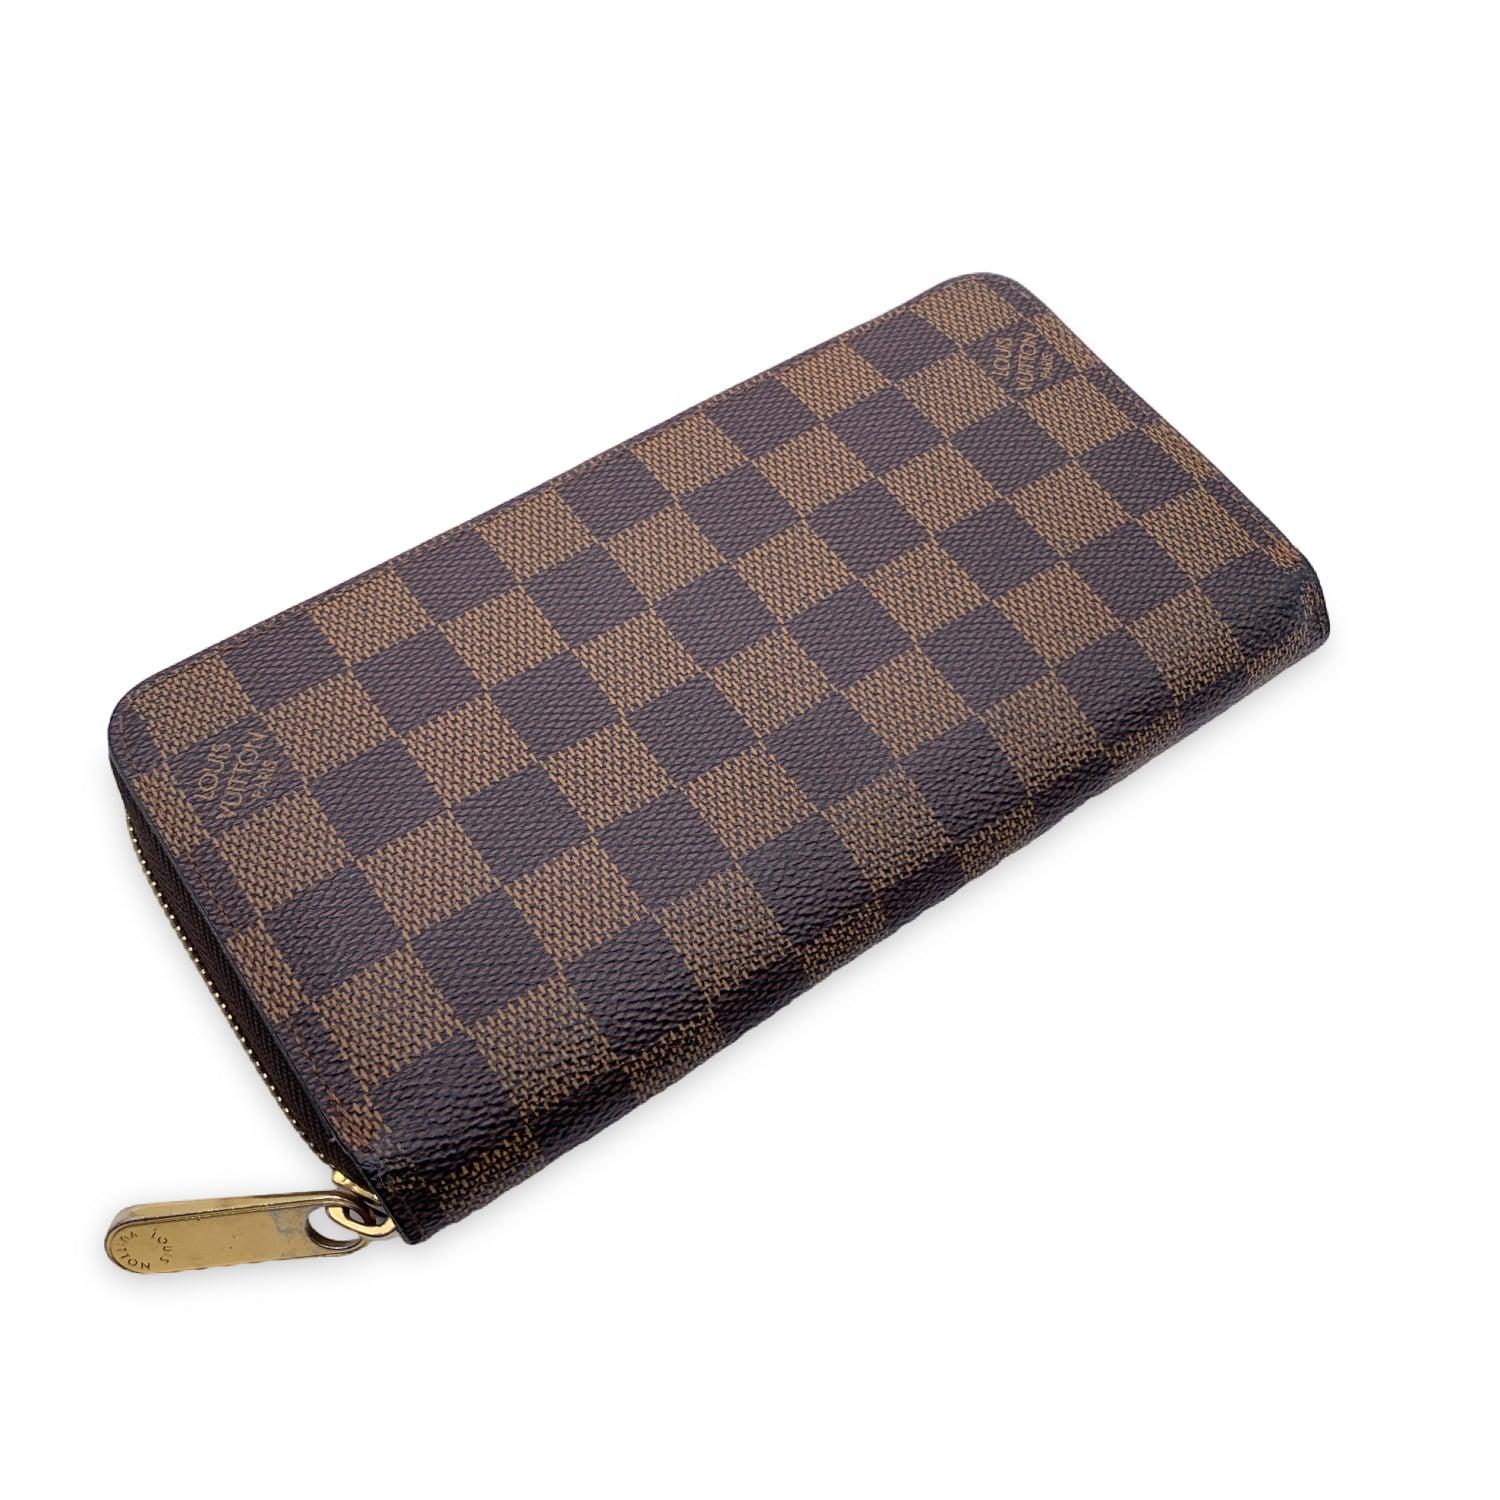 LOUIS VUITTON Damier Ebene Zippy Wallet. Zip closure. It features 2 open pockets, 1 zip coin compartment, 3 flat open pocket. 12 credit card slots. 'LOUIS VUITTON Paris - made in Spain' embossed inside. Authenticity serial number GI4136 embossed